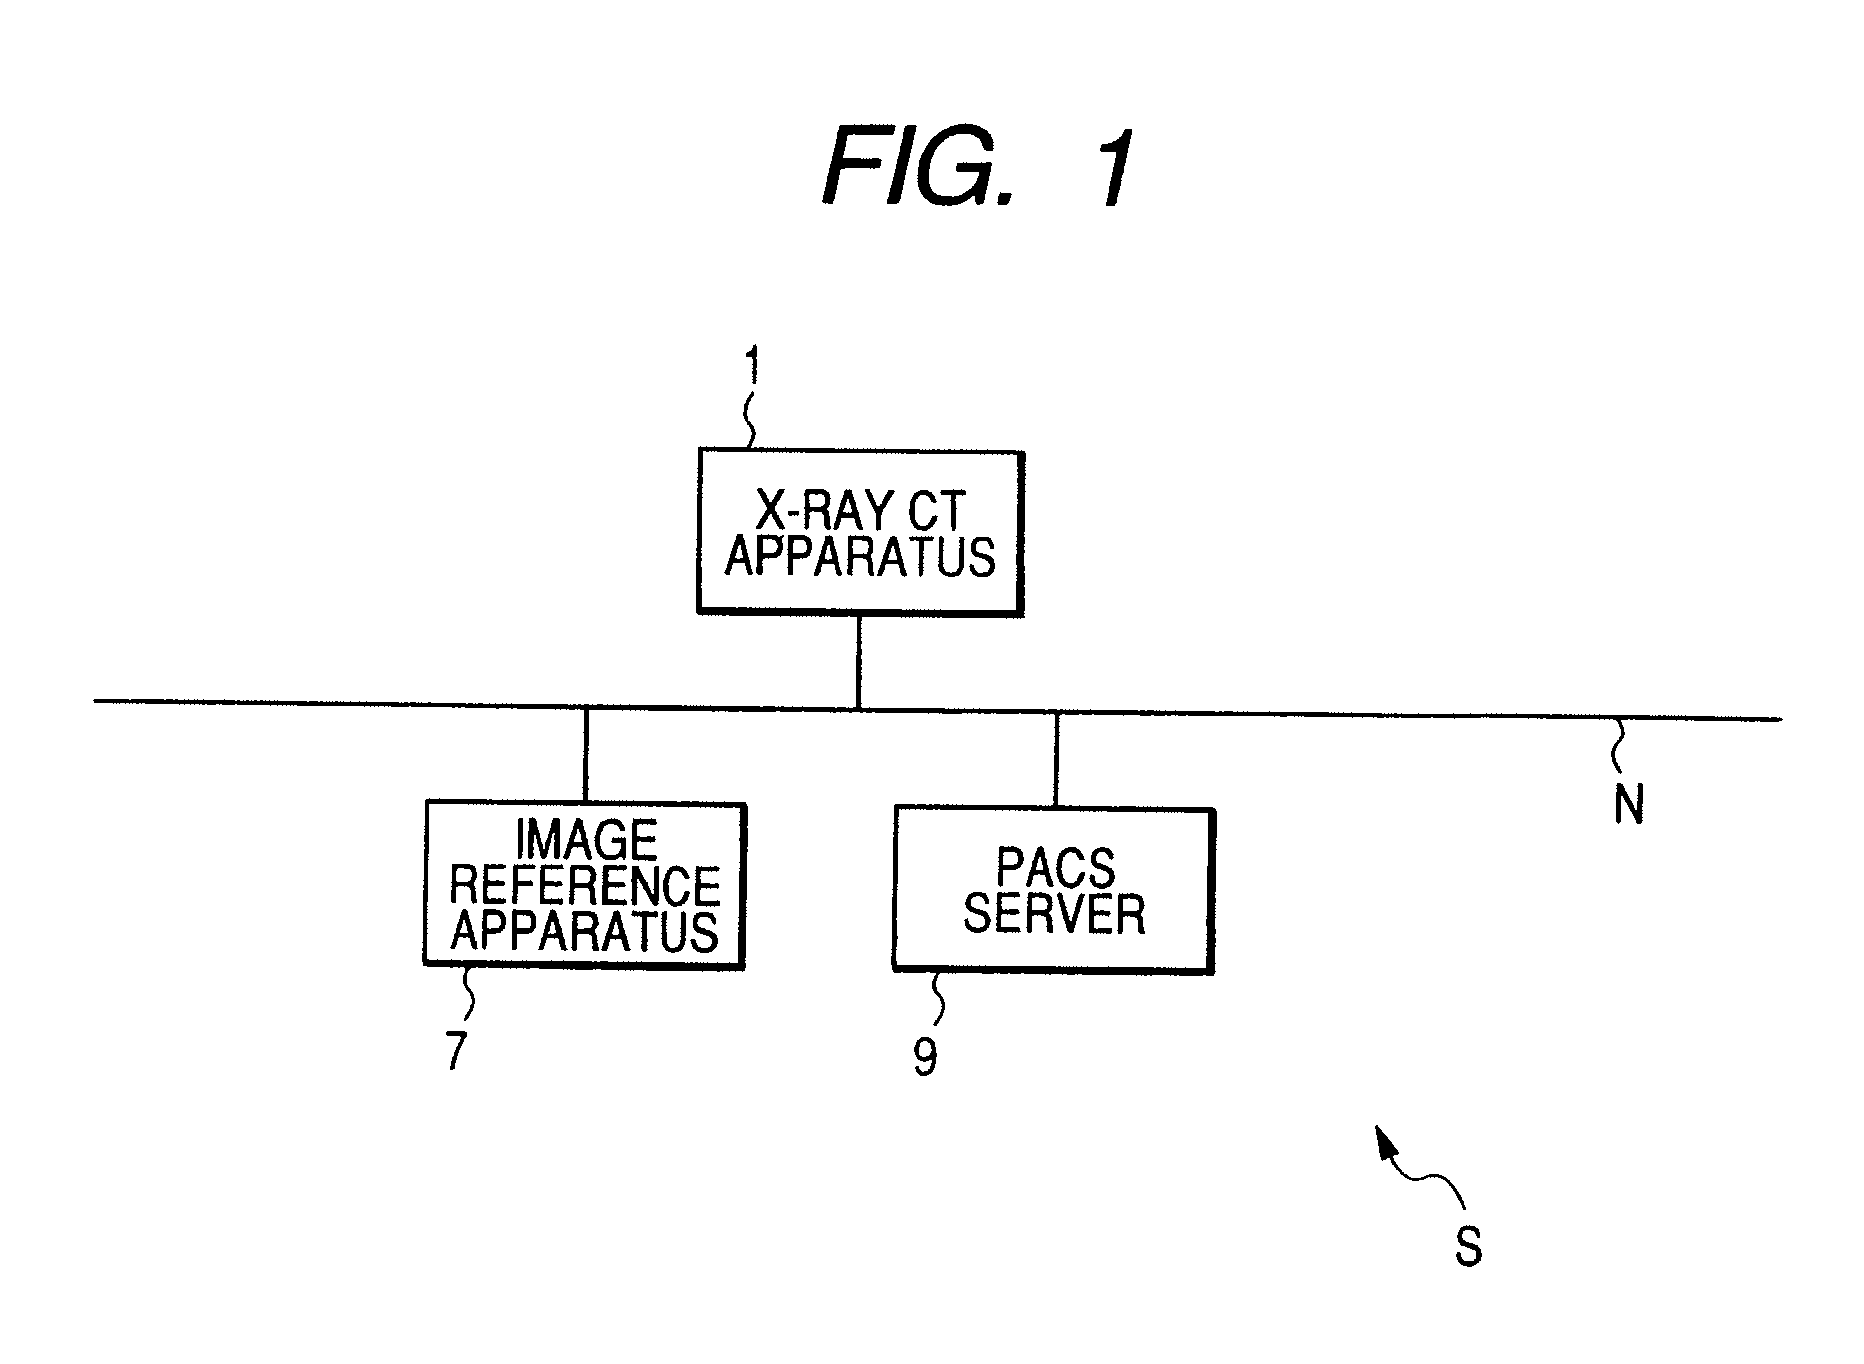 Medical image diagnostic apparatus, picture archiving communication system server, image reference apparatus, and medical image diagnostic system